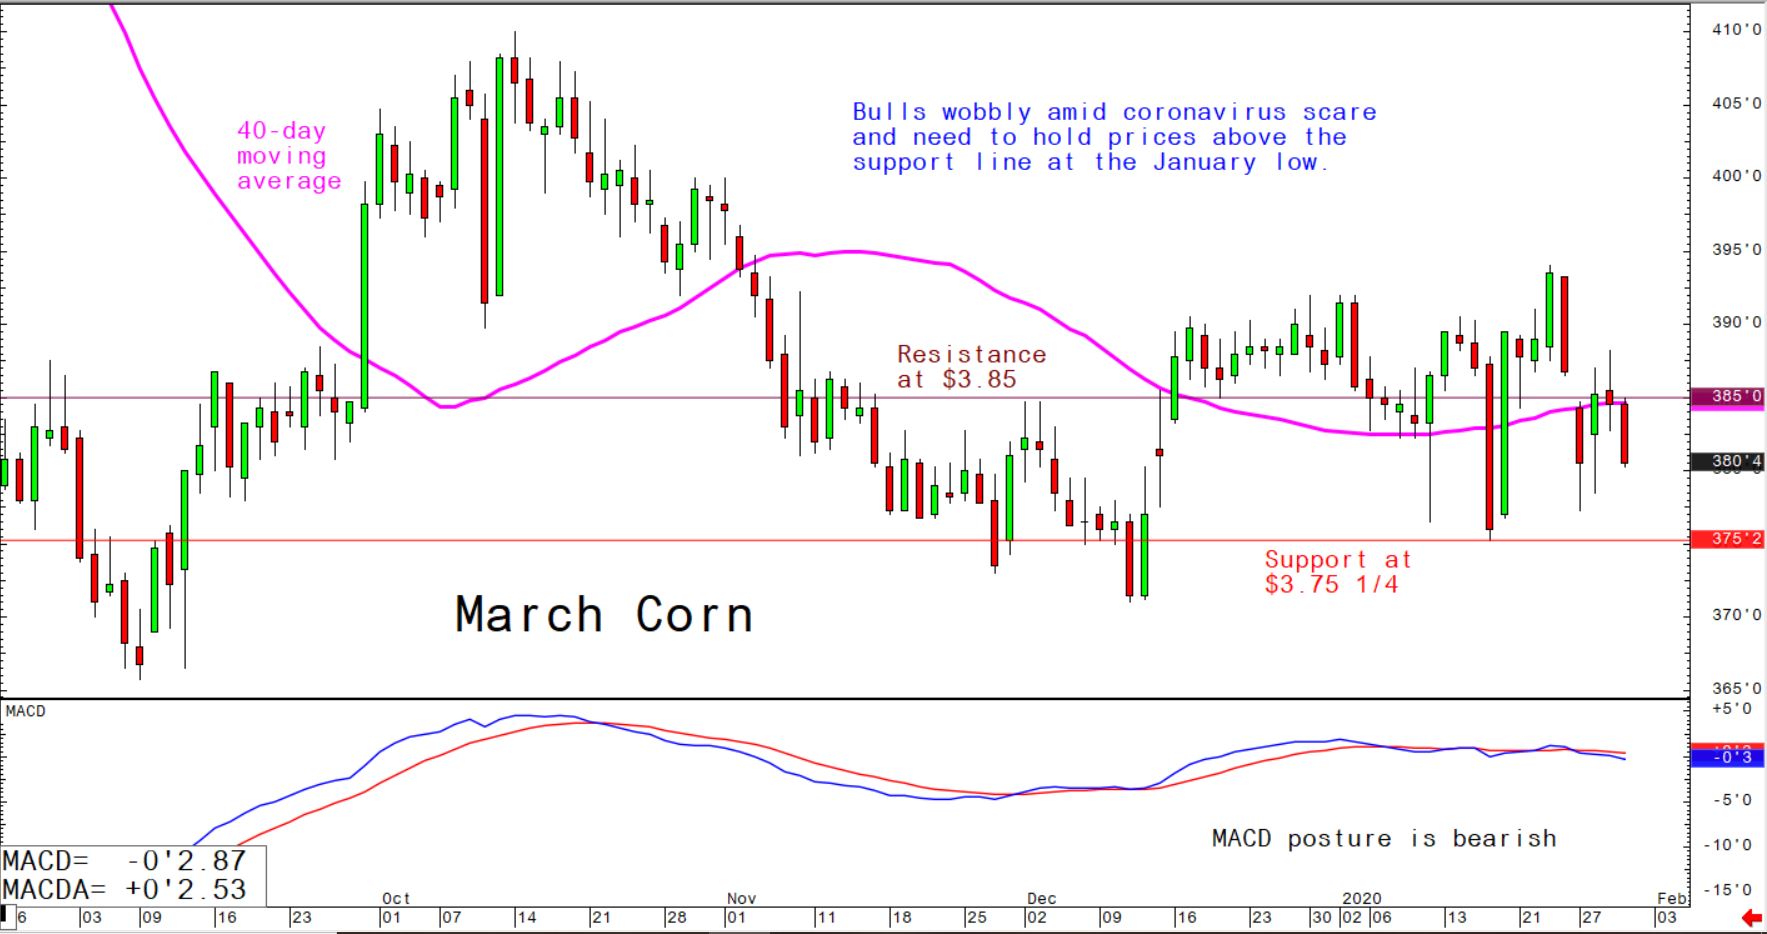 Bulls wobbly amid coronavirus scare and need to hold prices above the support line at the January low